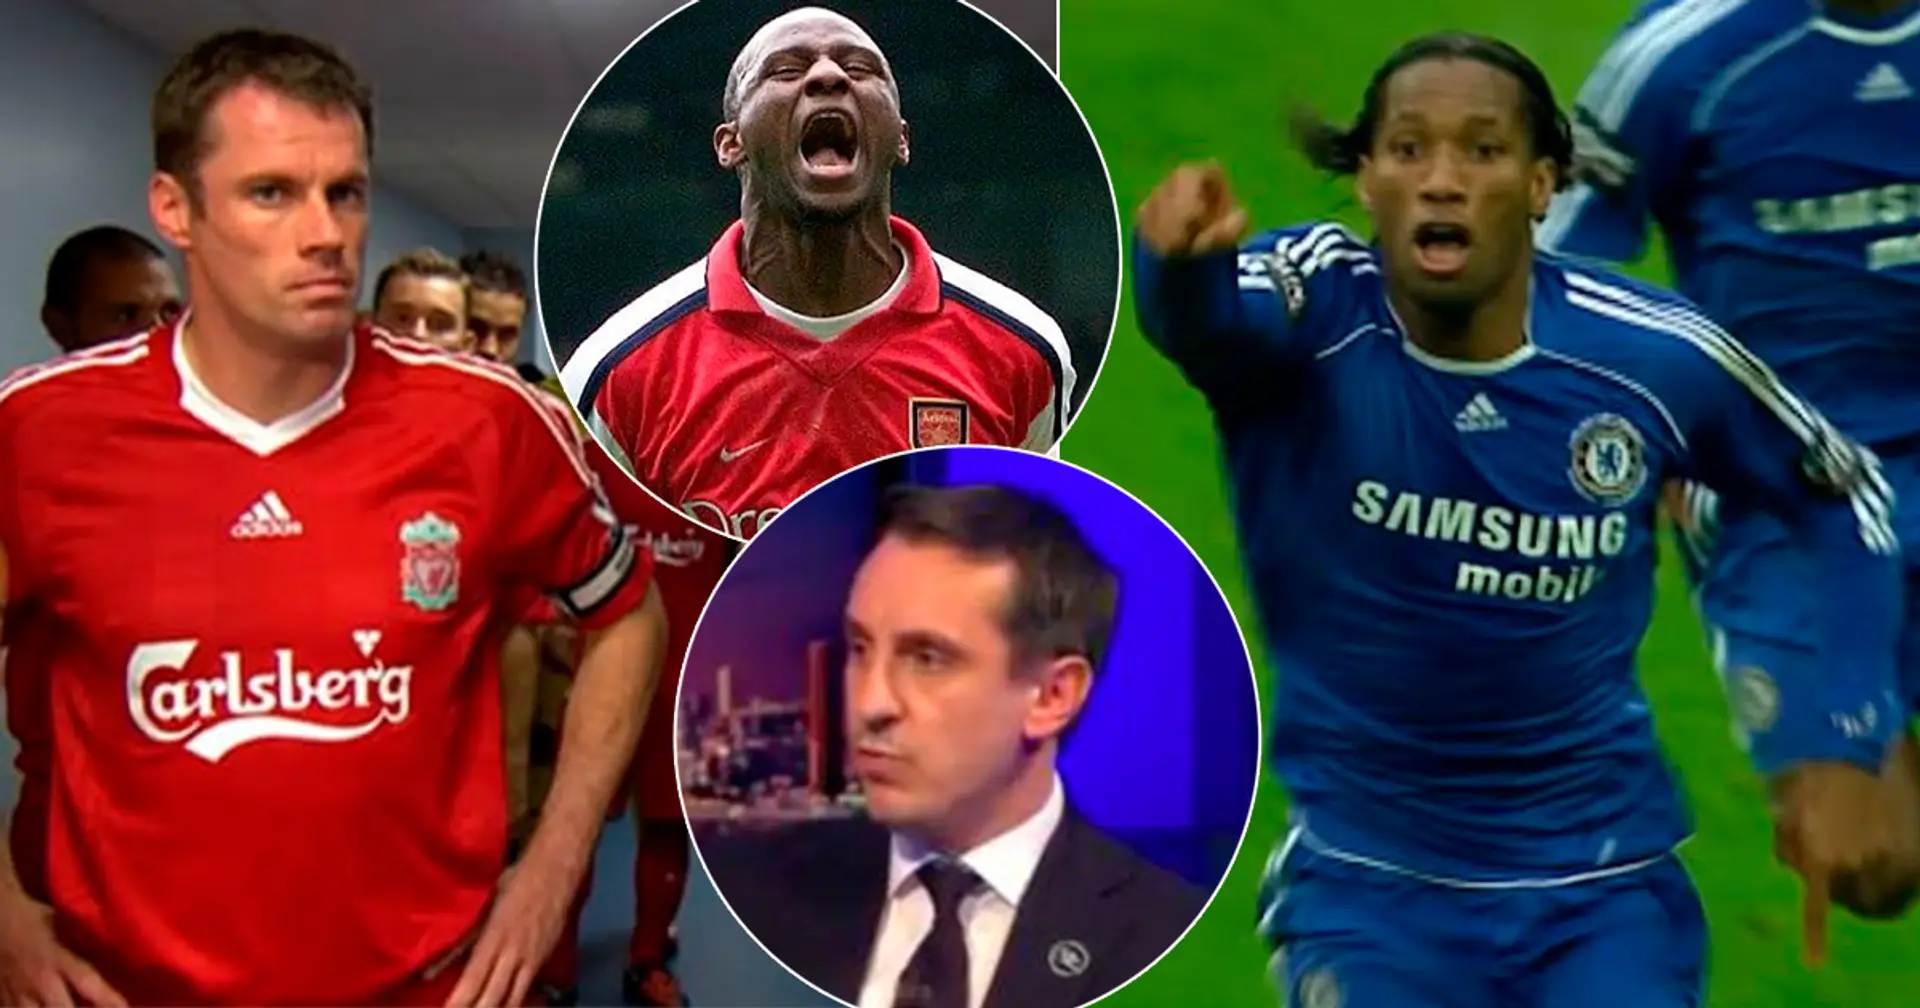 9 PL legends who never won Player of the Month awards revealed - 2 former Chelsea stars included